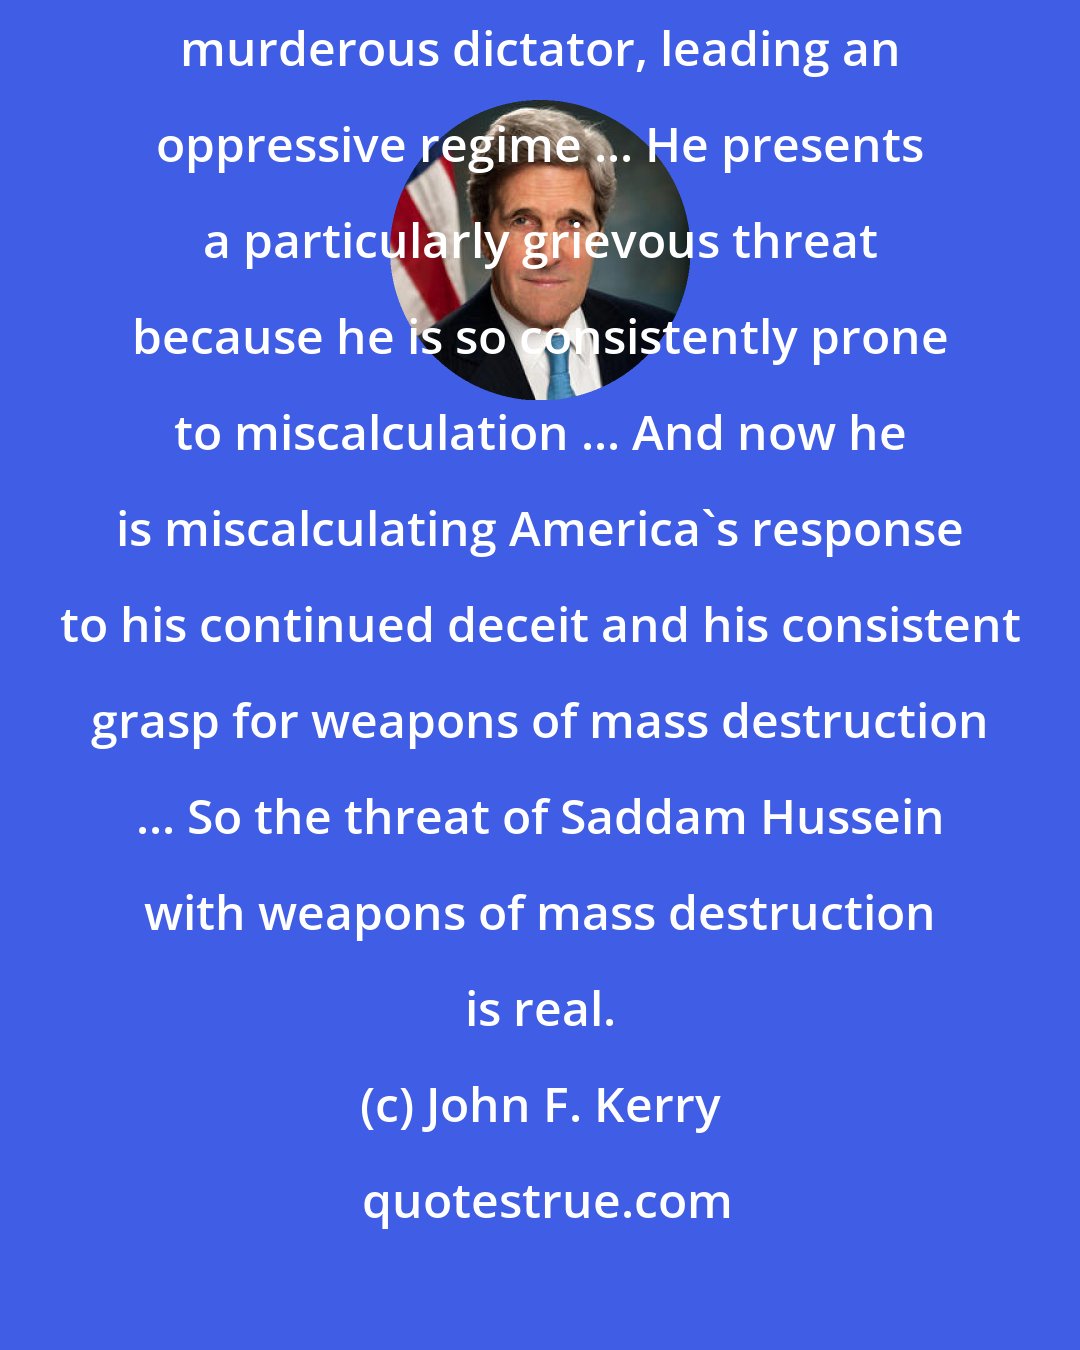 John F. Kerry: Without question, we need to disarm Saddam Hussein. He is a brutal, murderous dictator, leading an oppressive regime ... He presents a particularly grievous threat because he is so consistently prone to miscalculation ... And now he is miscalculating America's response to his continued deceit and his consistent grasp for weapons of mass destruction ... So the threat of Saddam Hussein with weapons of mass destruction is real.